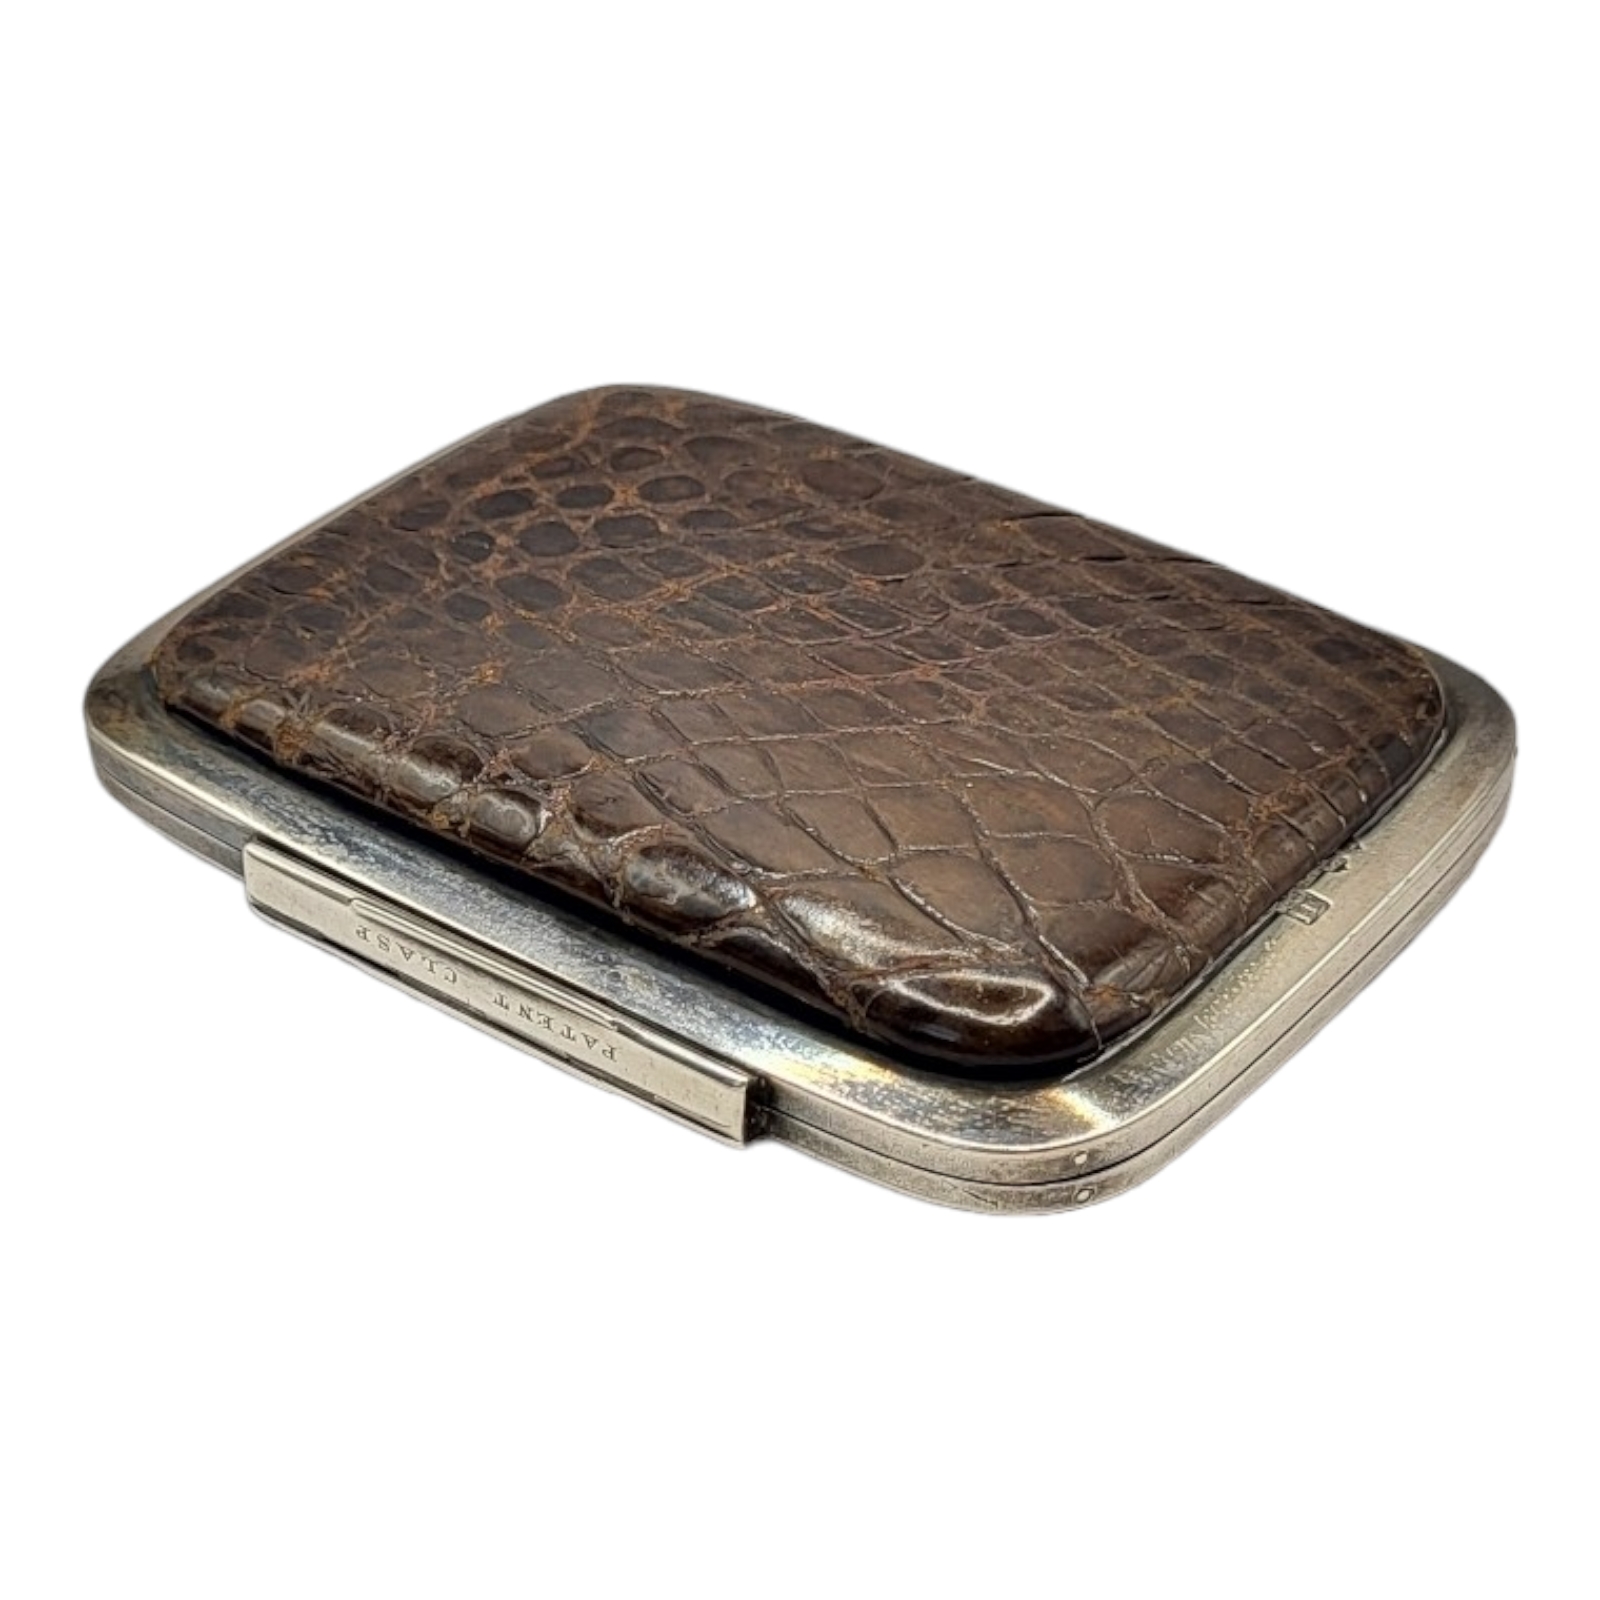 JENNER AND KNEWSTUB, LONDON, A VICTORIAN SILVER AND SNAKE SKIN RECTANGULAR PURSE Hallmarked with